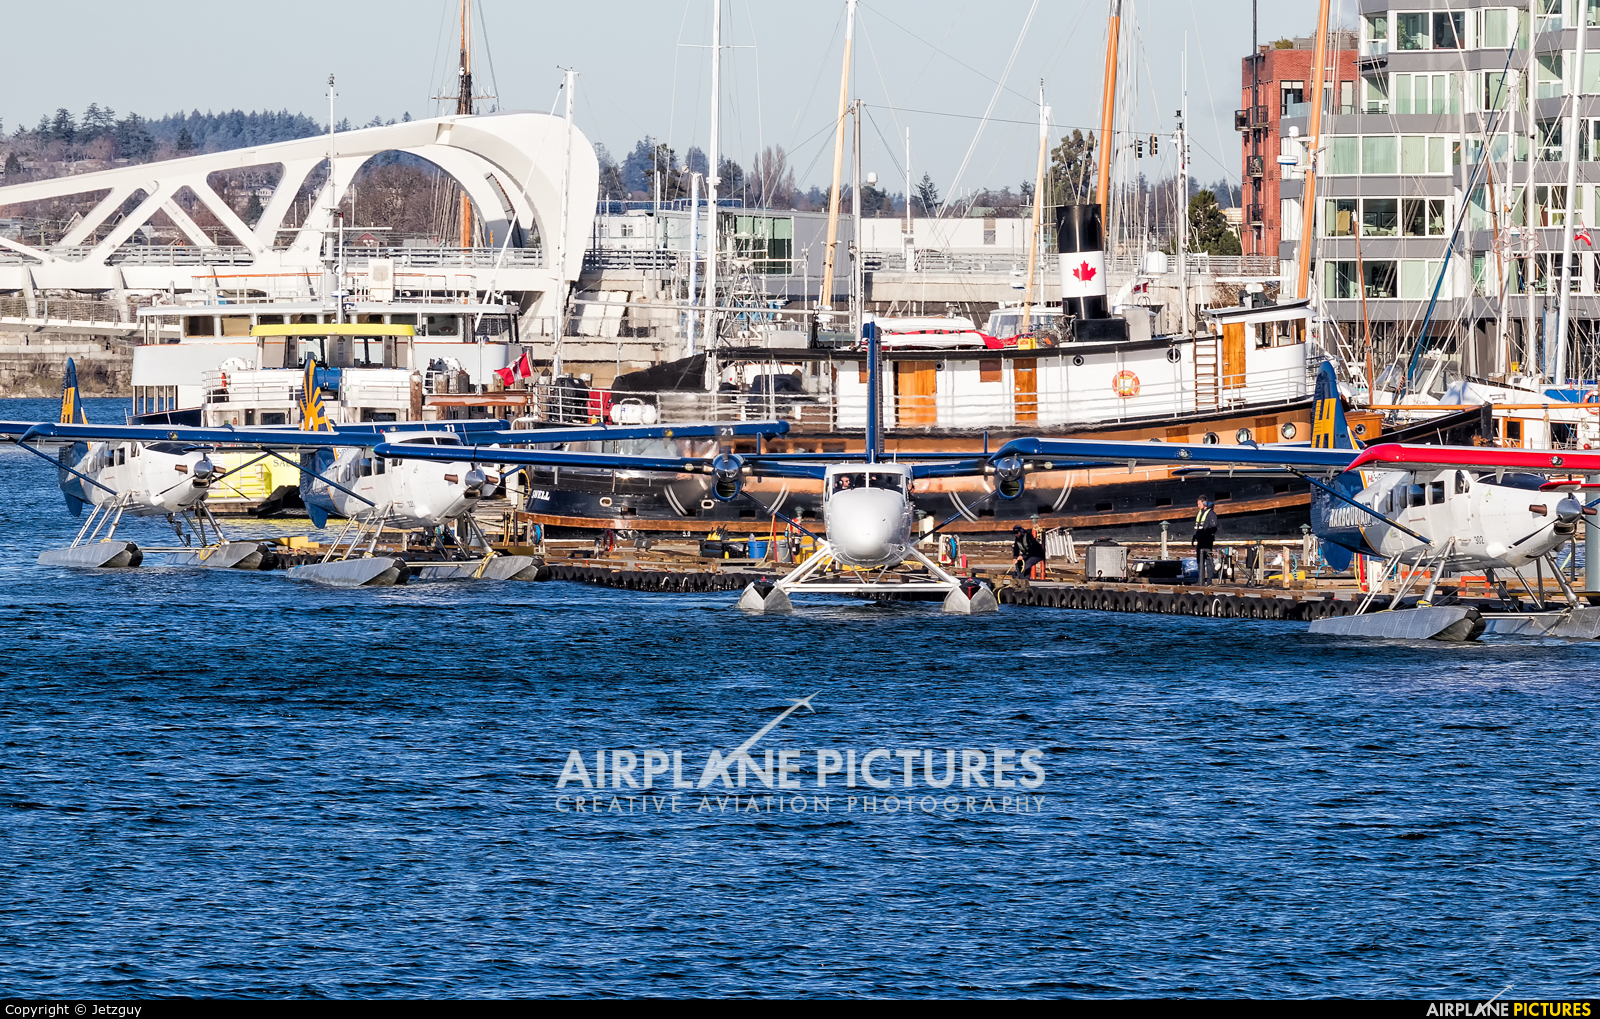 Harbour Air C-GFHA aircraft at Victoria Harbour, BC